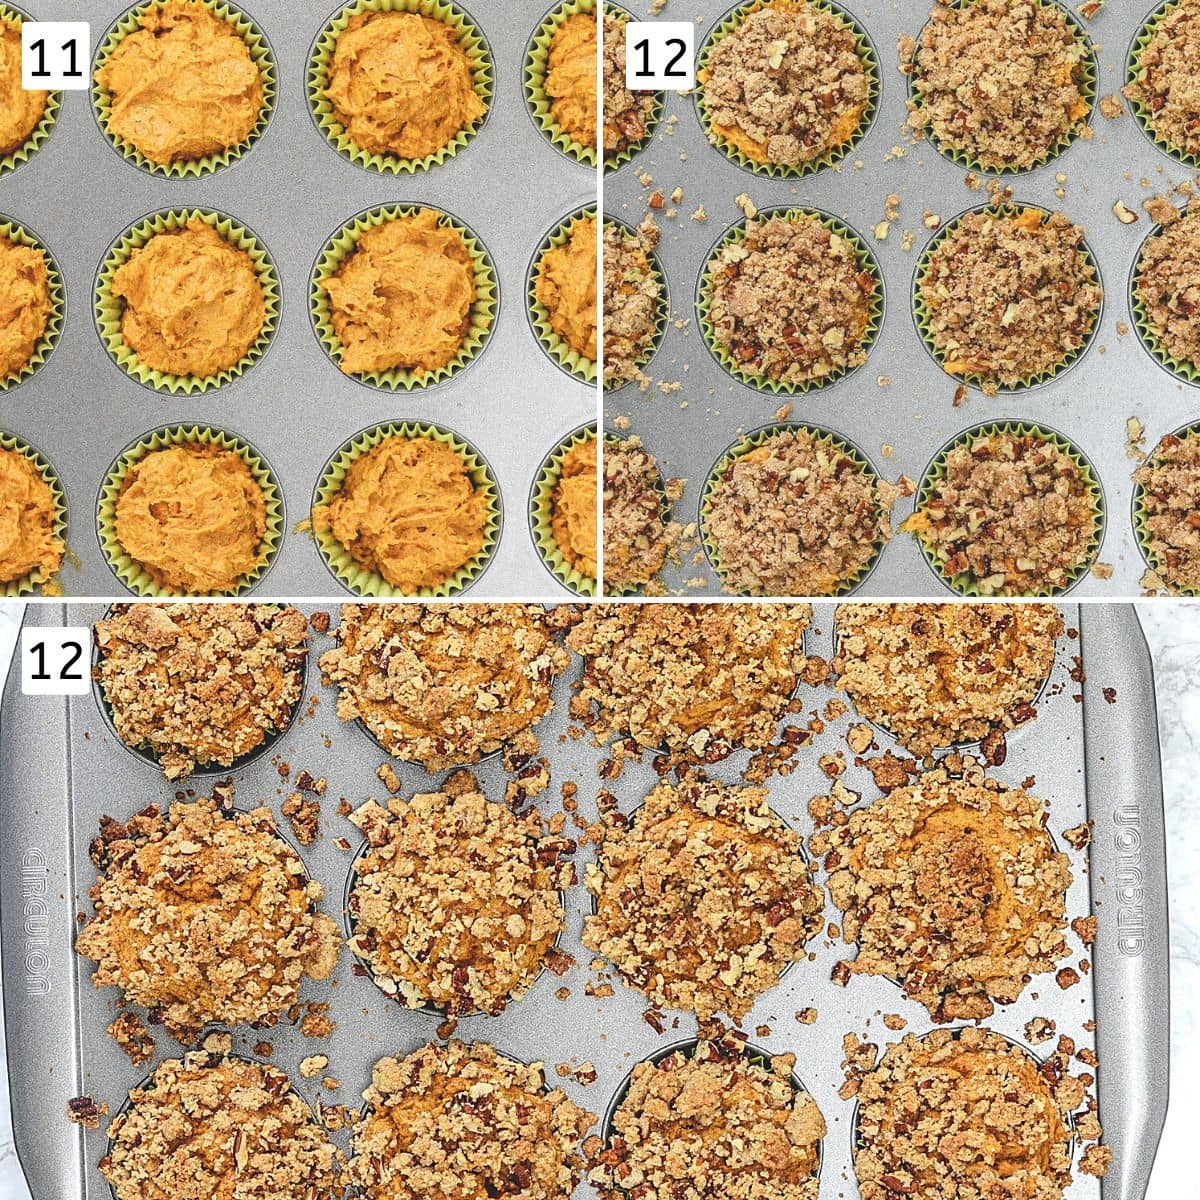 Collage of 3 images showing muffin batter in the liners, topped with crumb topping and baked muffins.